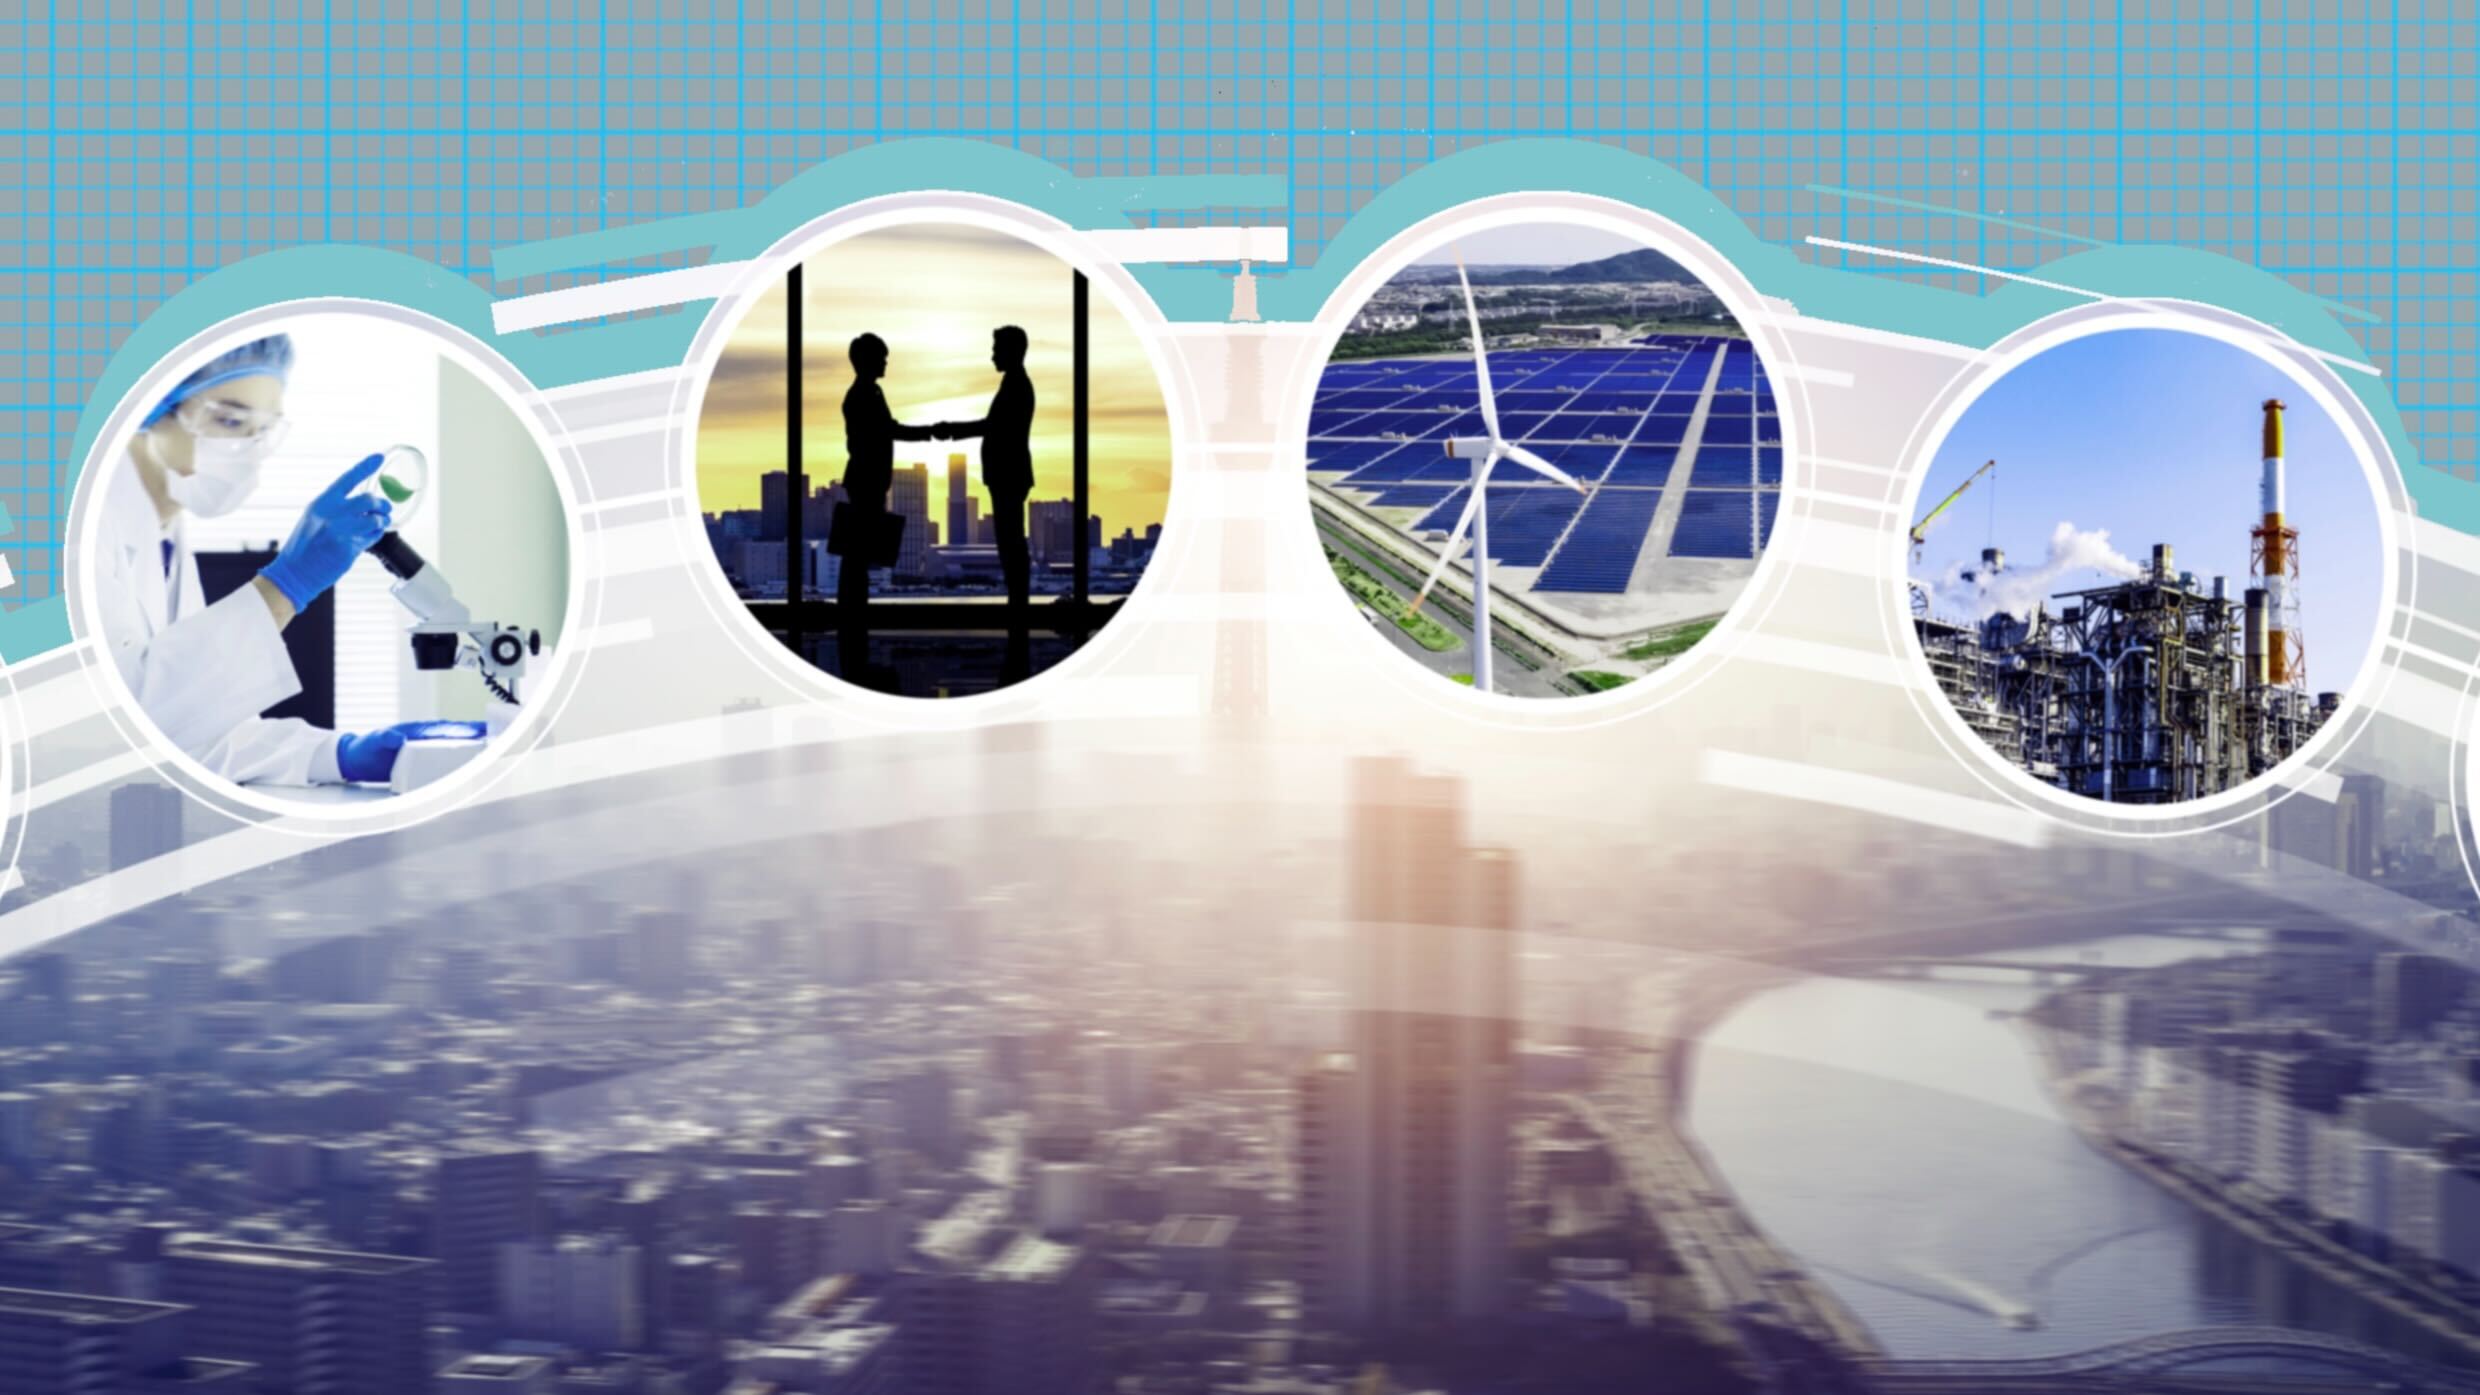 What will shape the future? Leaders at WGS in Dubai discuss technology and decarbonization